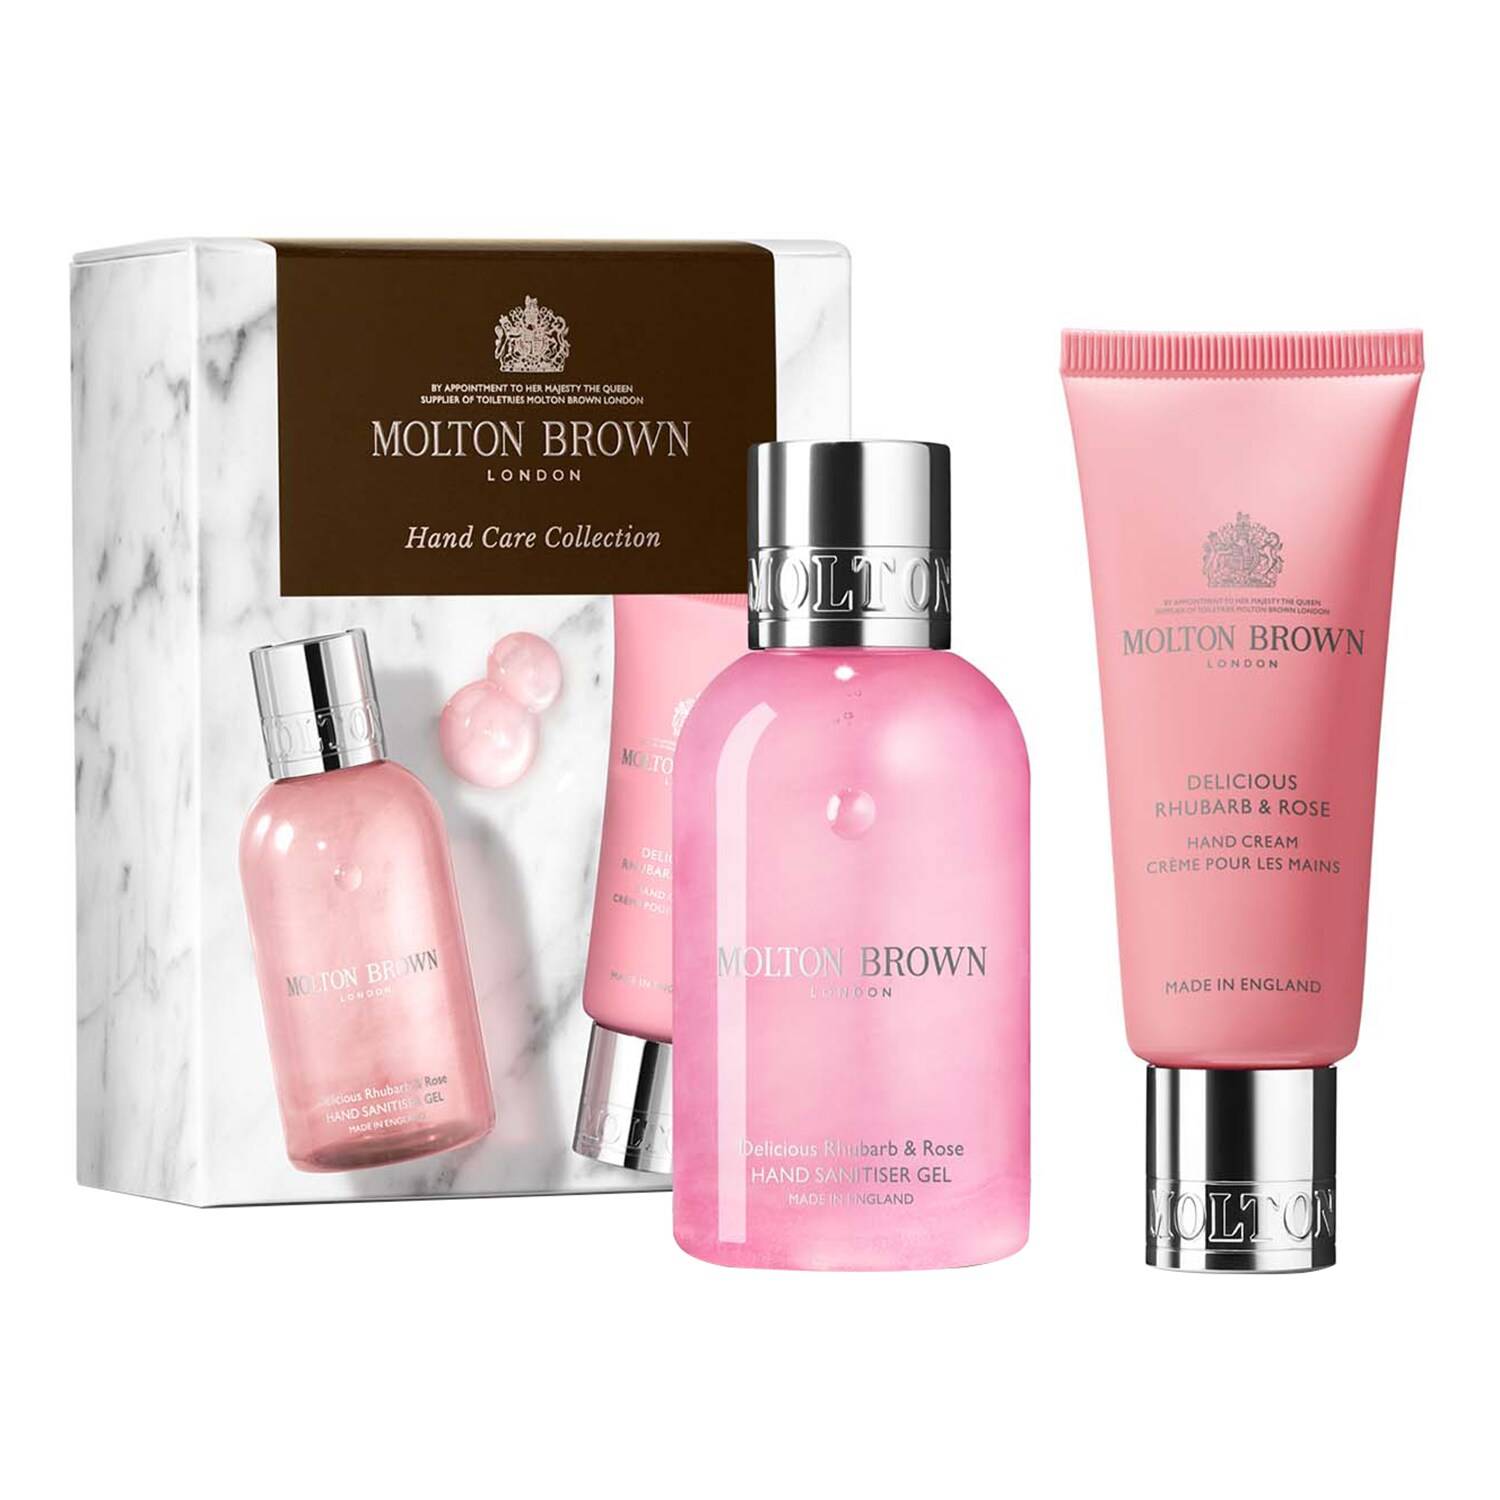 Molton Brown Delicious Rhubarb & Rose Hand Care Collection